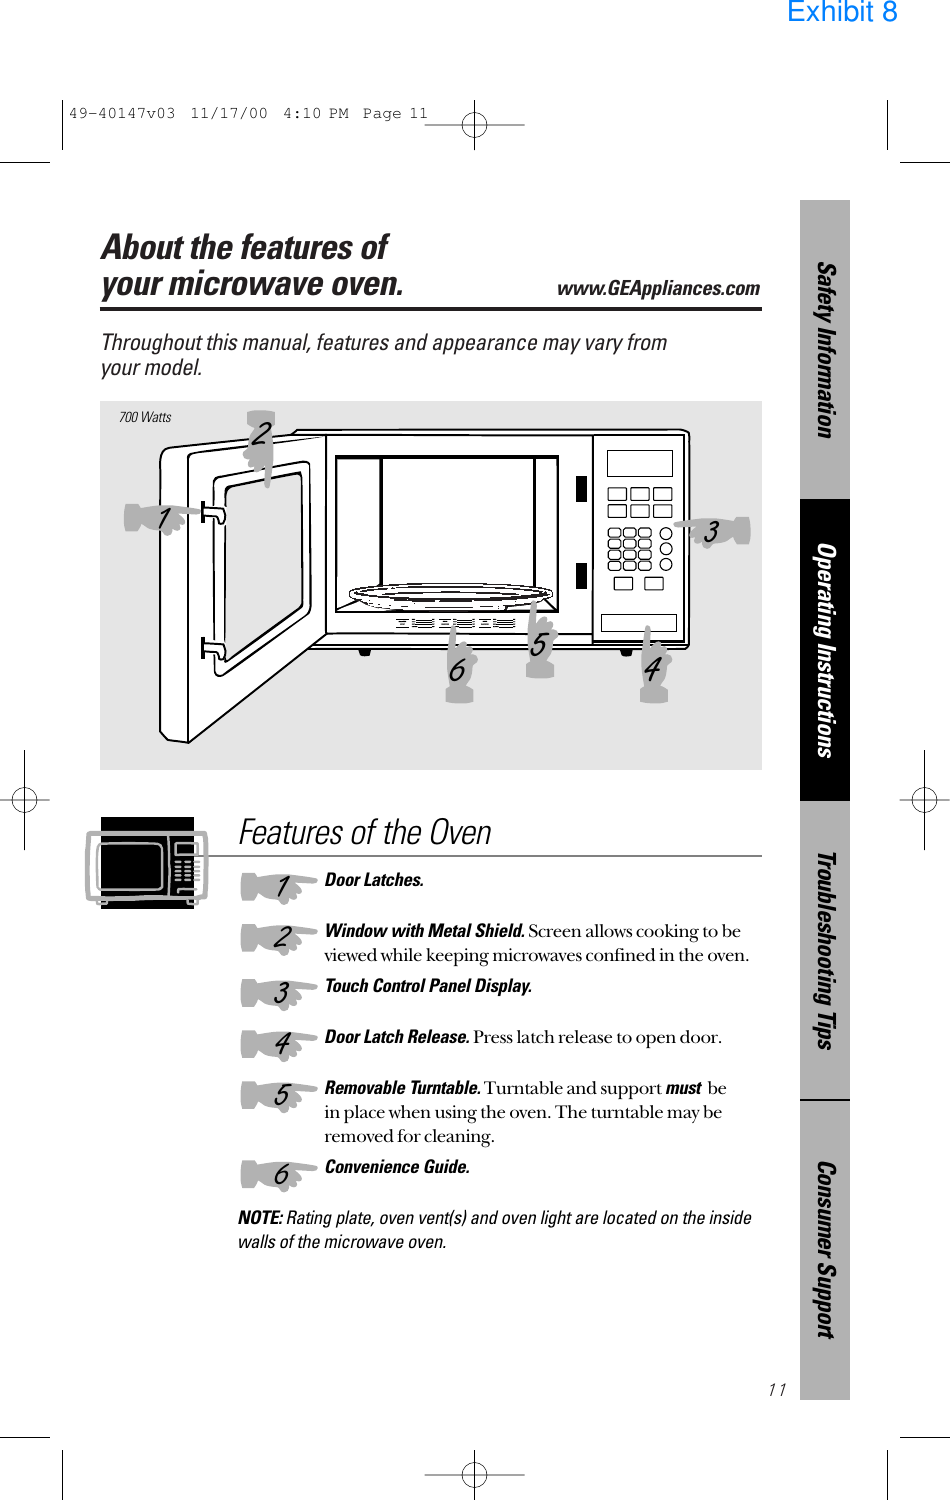 11About the features of your microwave oven.www.GEAppliances.com Throughout this manual, features and appearance may vary from your model.700 WattsFeatures of the OvenDoor Latches.Window with Metal Shield. Screen allows cooking to beviewed while keeping microwaves confined in the oven.Touch Control Panel Display.Door Latch Release. Press latch release to open door.Removable Turntable.Turntable and support mustbe in place when using the oven. The turntable may beremoved for cleaning.Convenience Guide.NOTE: Rating plate, oven vent(s) and oven light are located on the insidewalls of the microwave oven.132465123456Consumer SupportTroubleshooting TipsOperating InstructionsSafety Information49-40147v03  11/17/00  4:10 PM  Page 11Exhibit 8